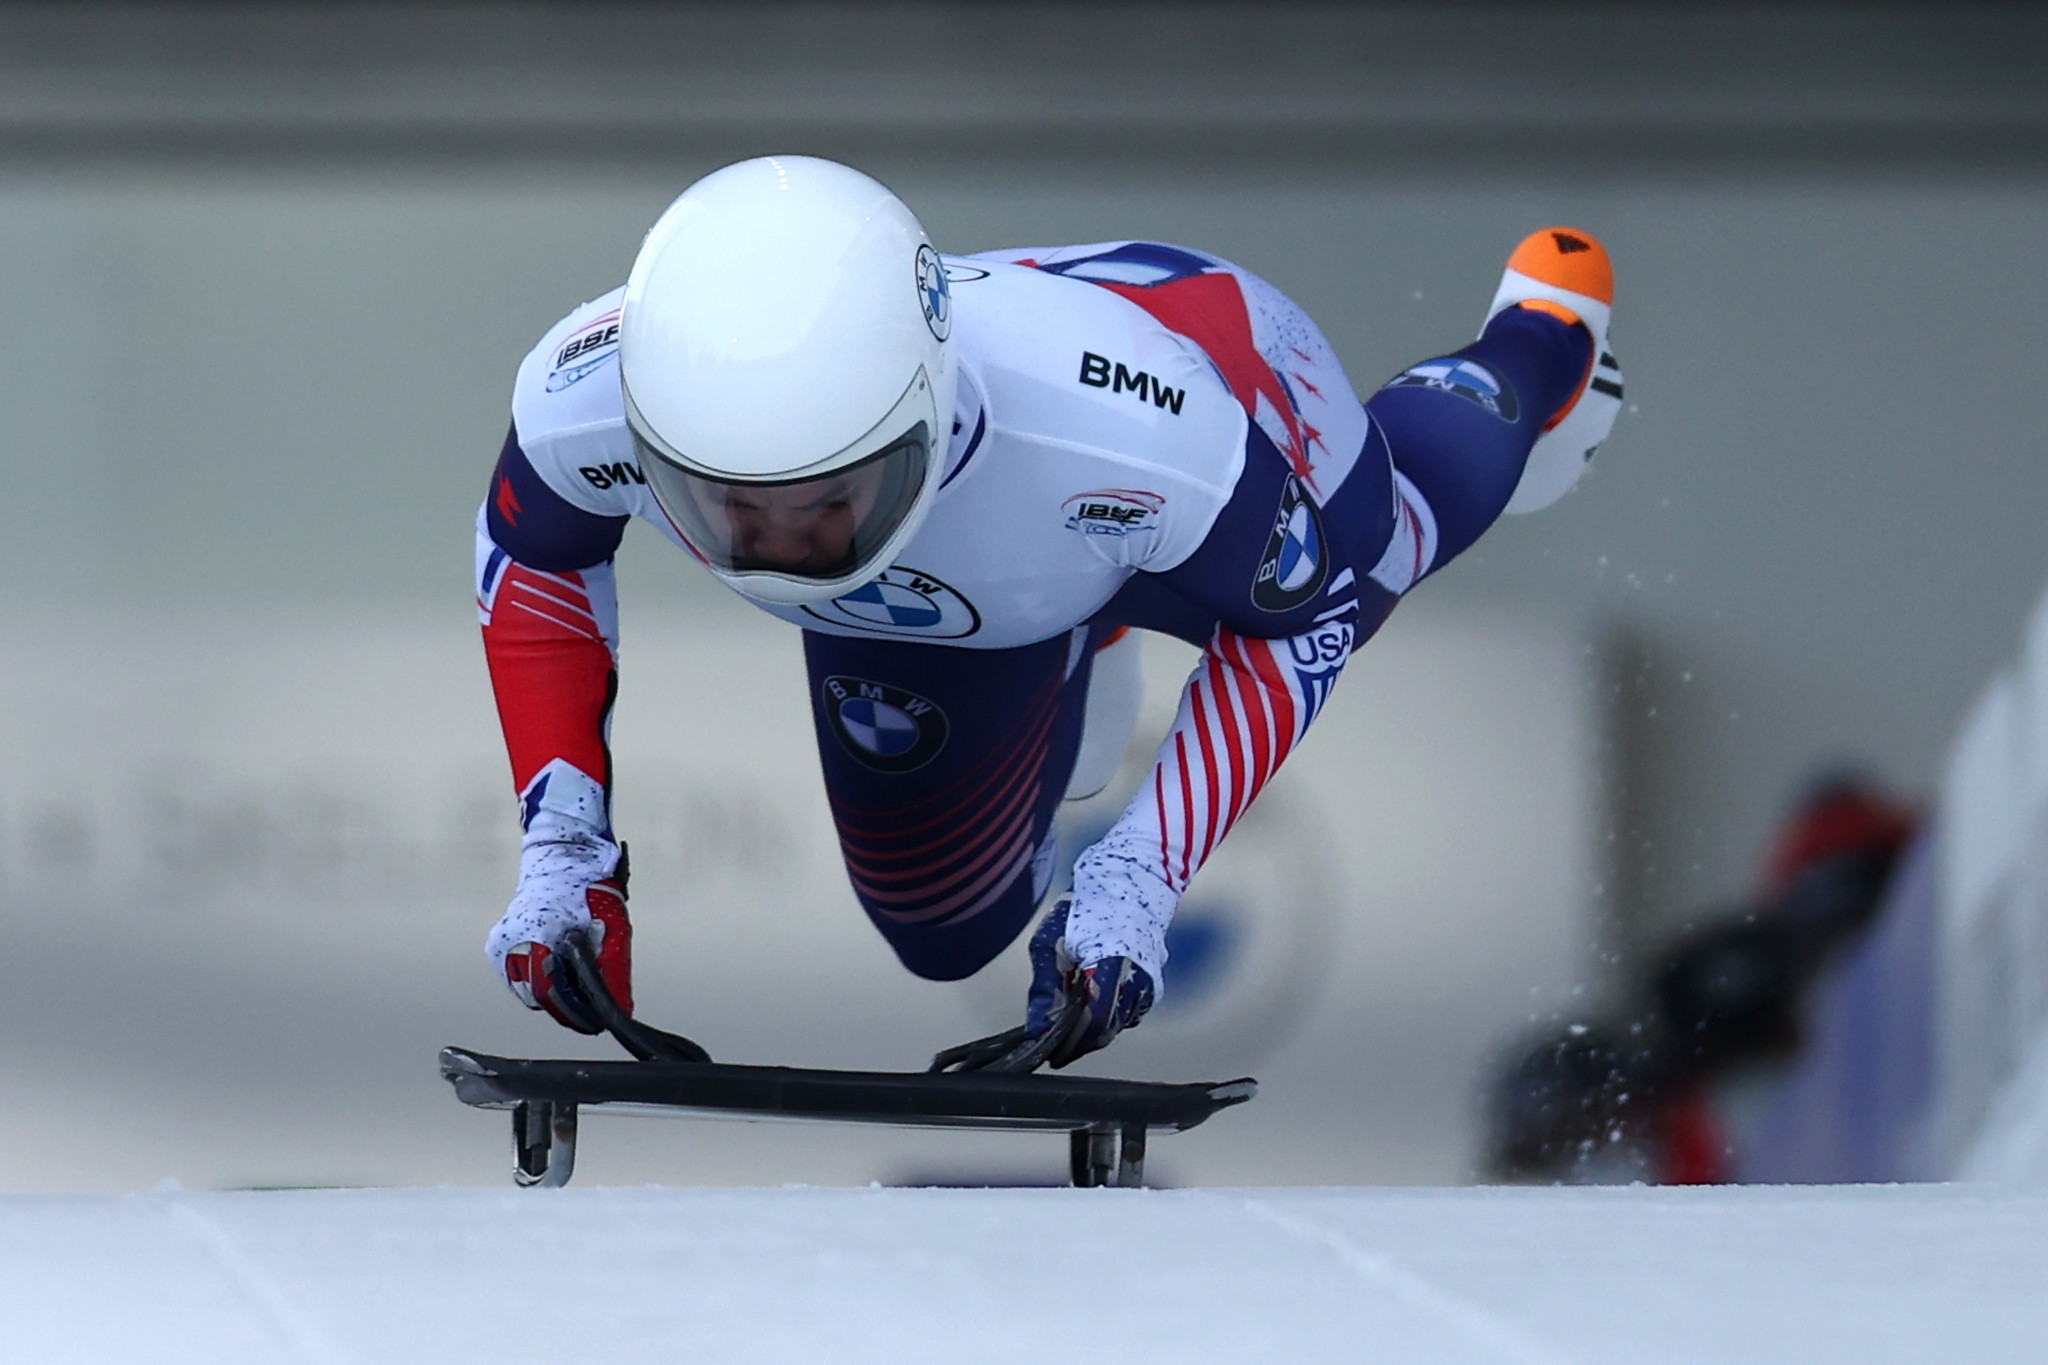 United States Bobsled and Skeleton are confident that the race suits produced by Qwixskinz help improve their athletes performances ©Getty Images